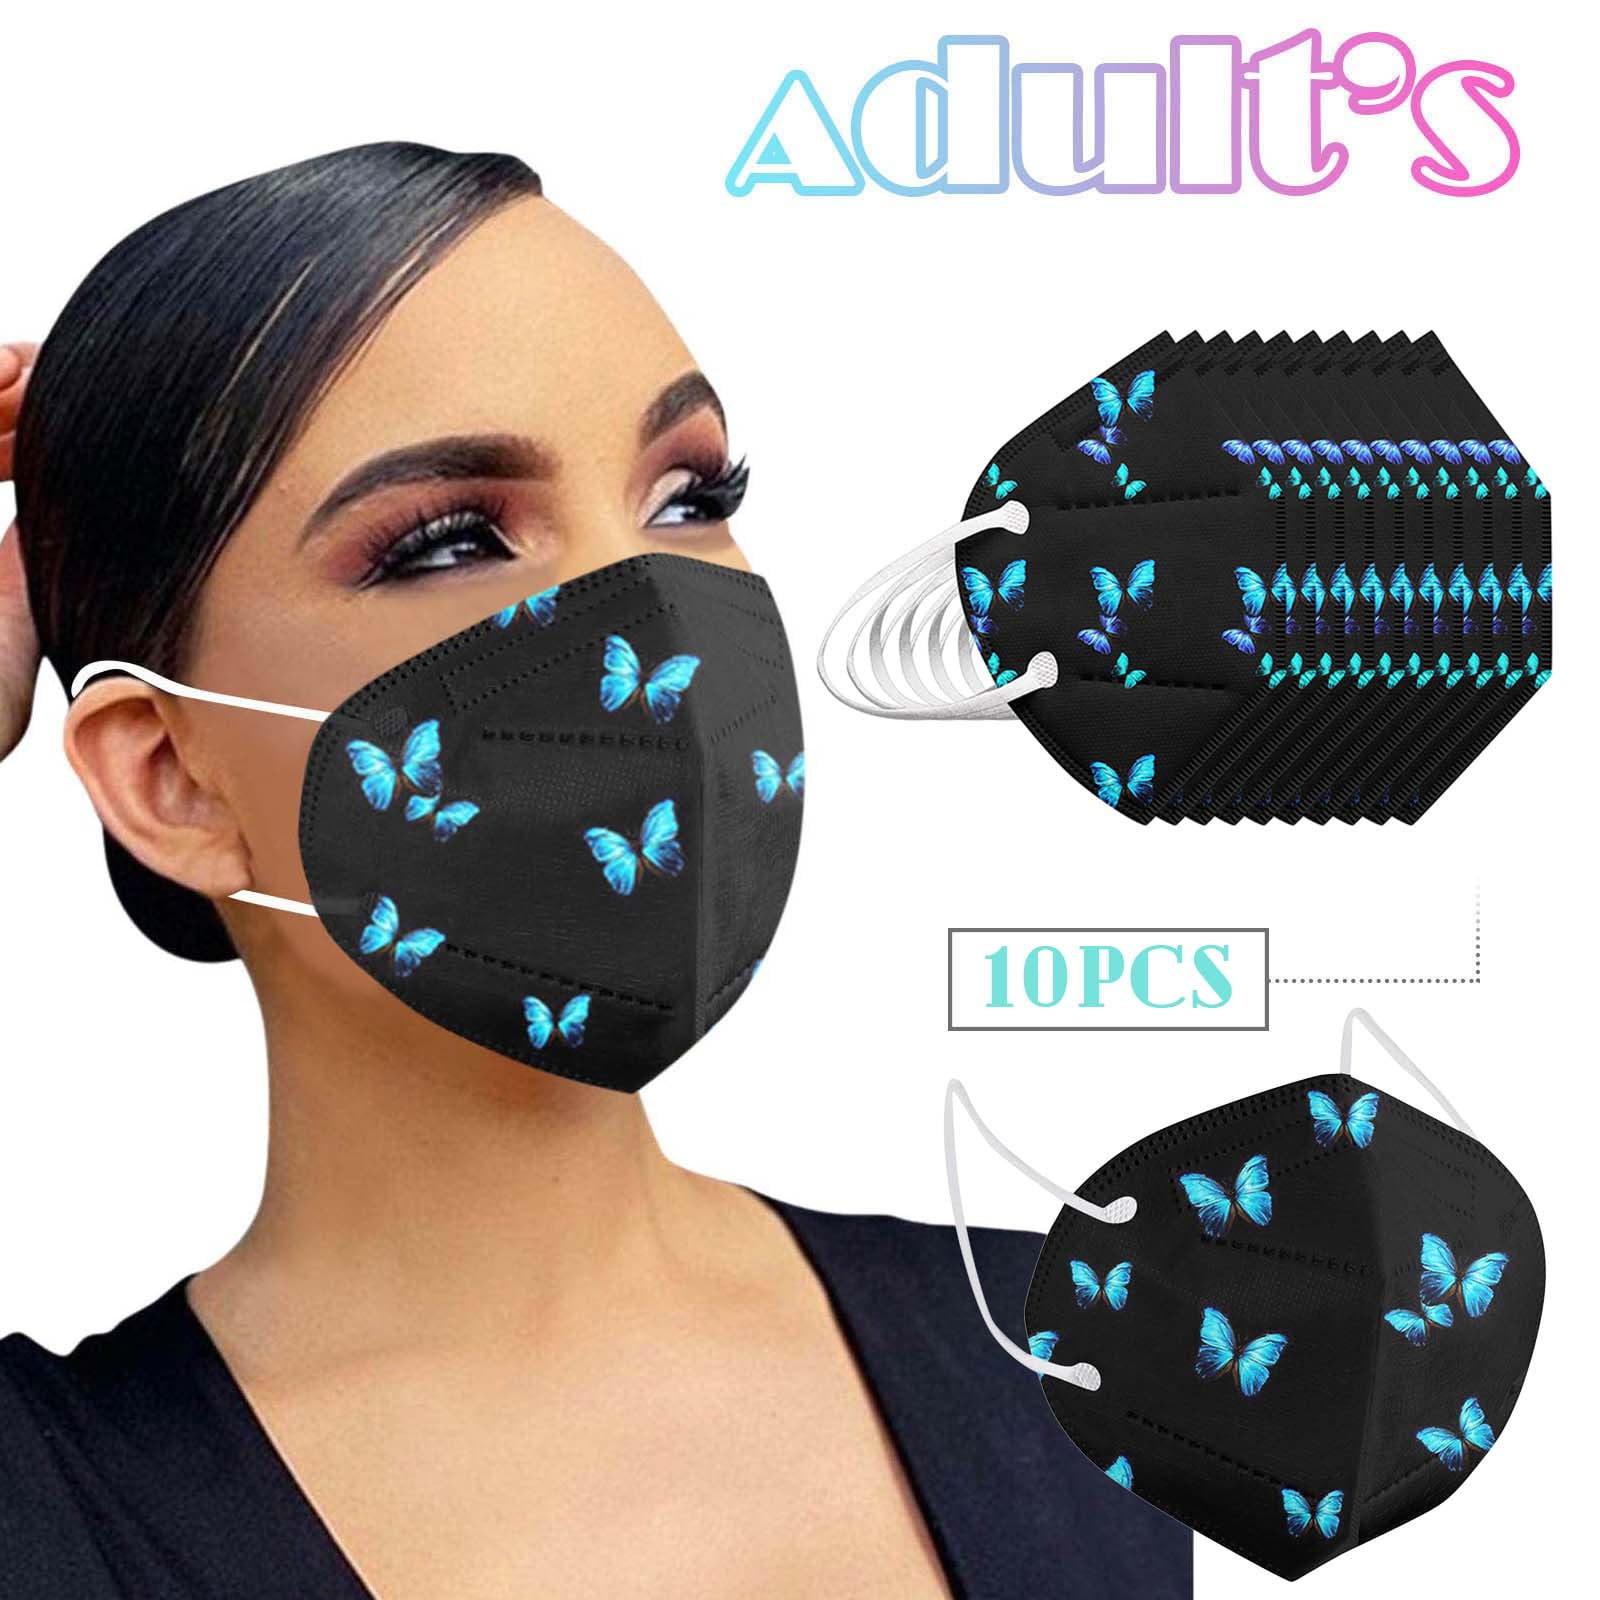 Filter for Men Women Activated Carbon Filter Protective Mouth Filter for Outdoor5 Layers Replaceable Anti Haze Filters gray 50pcs 